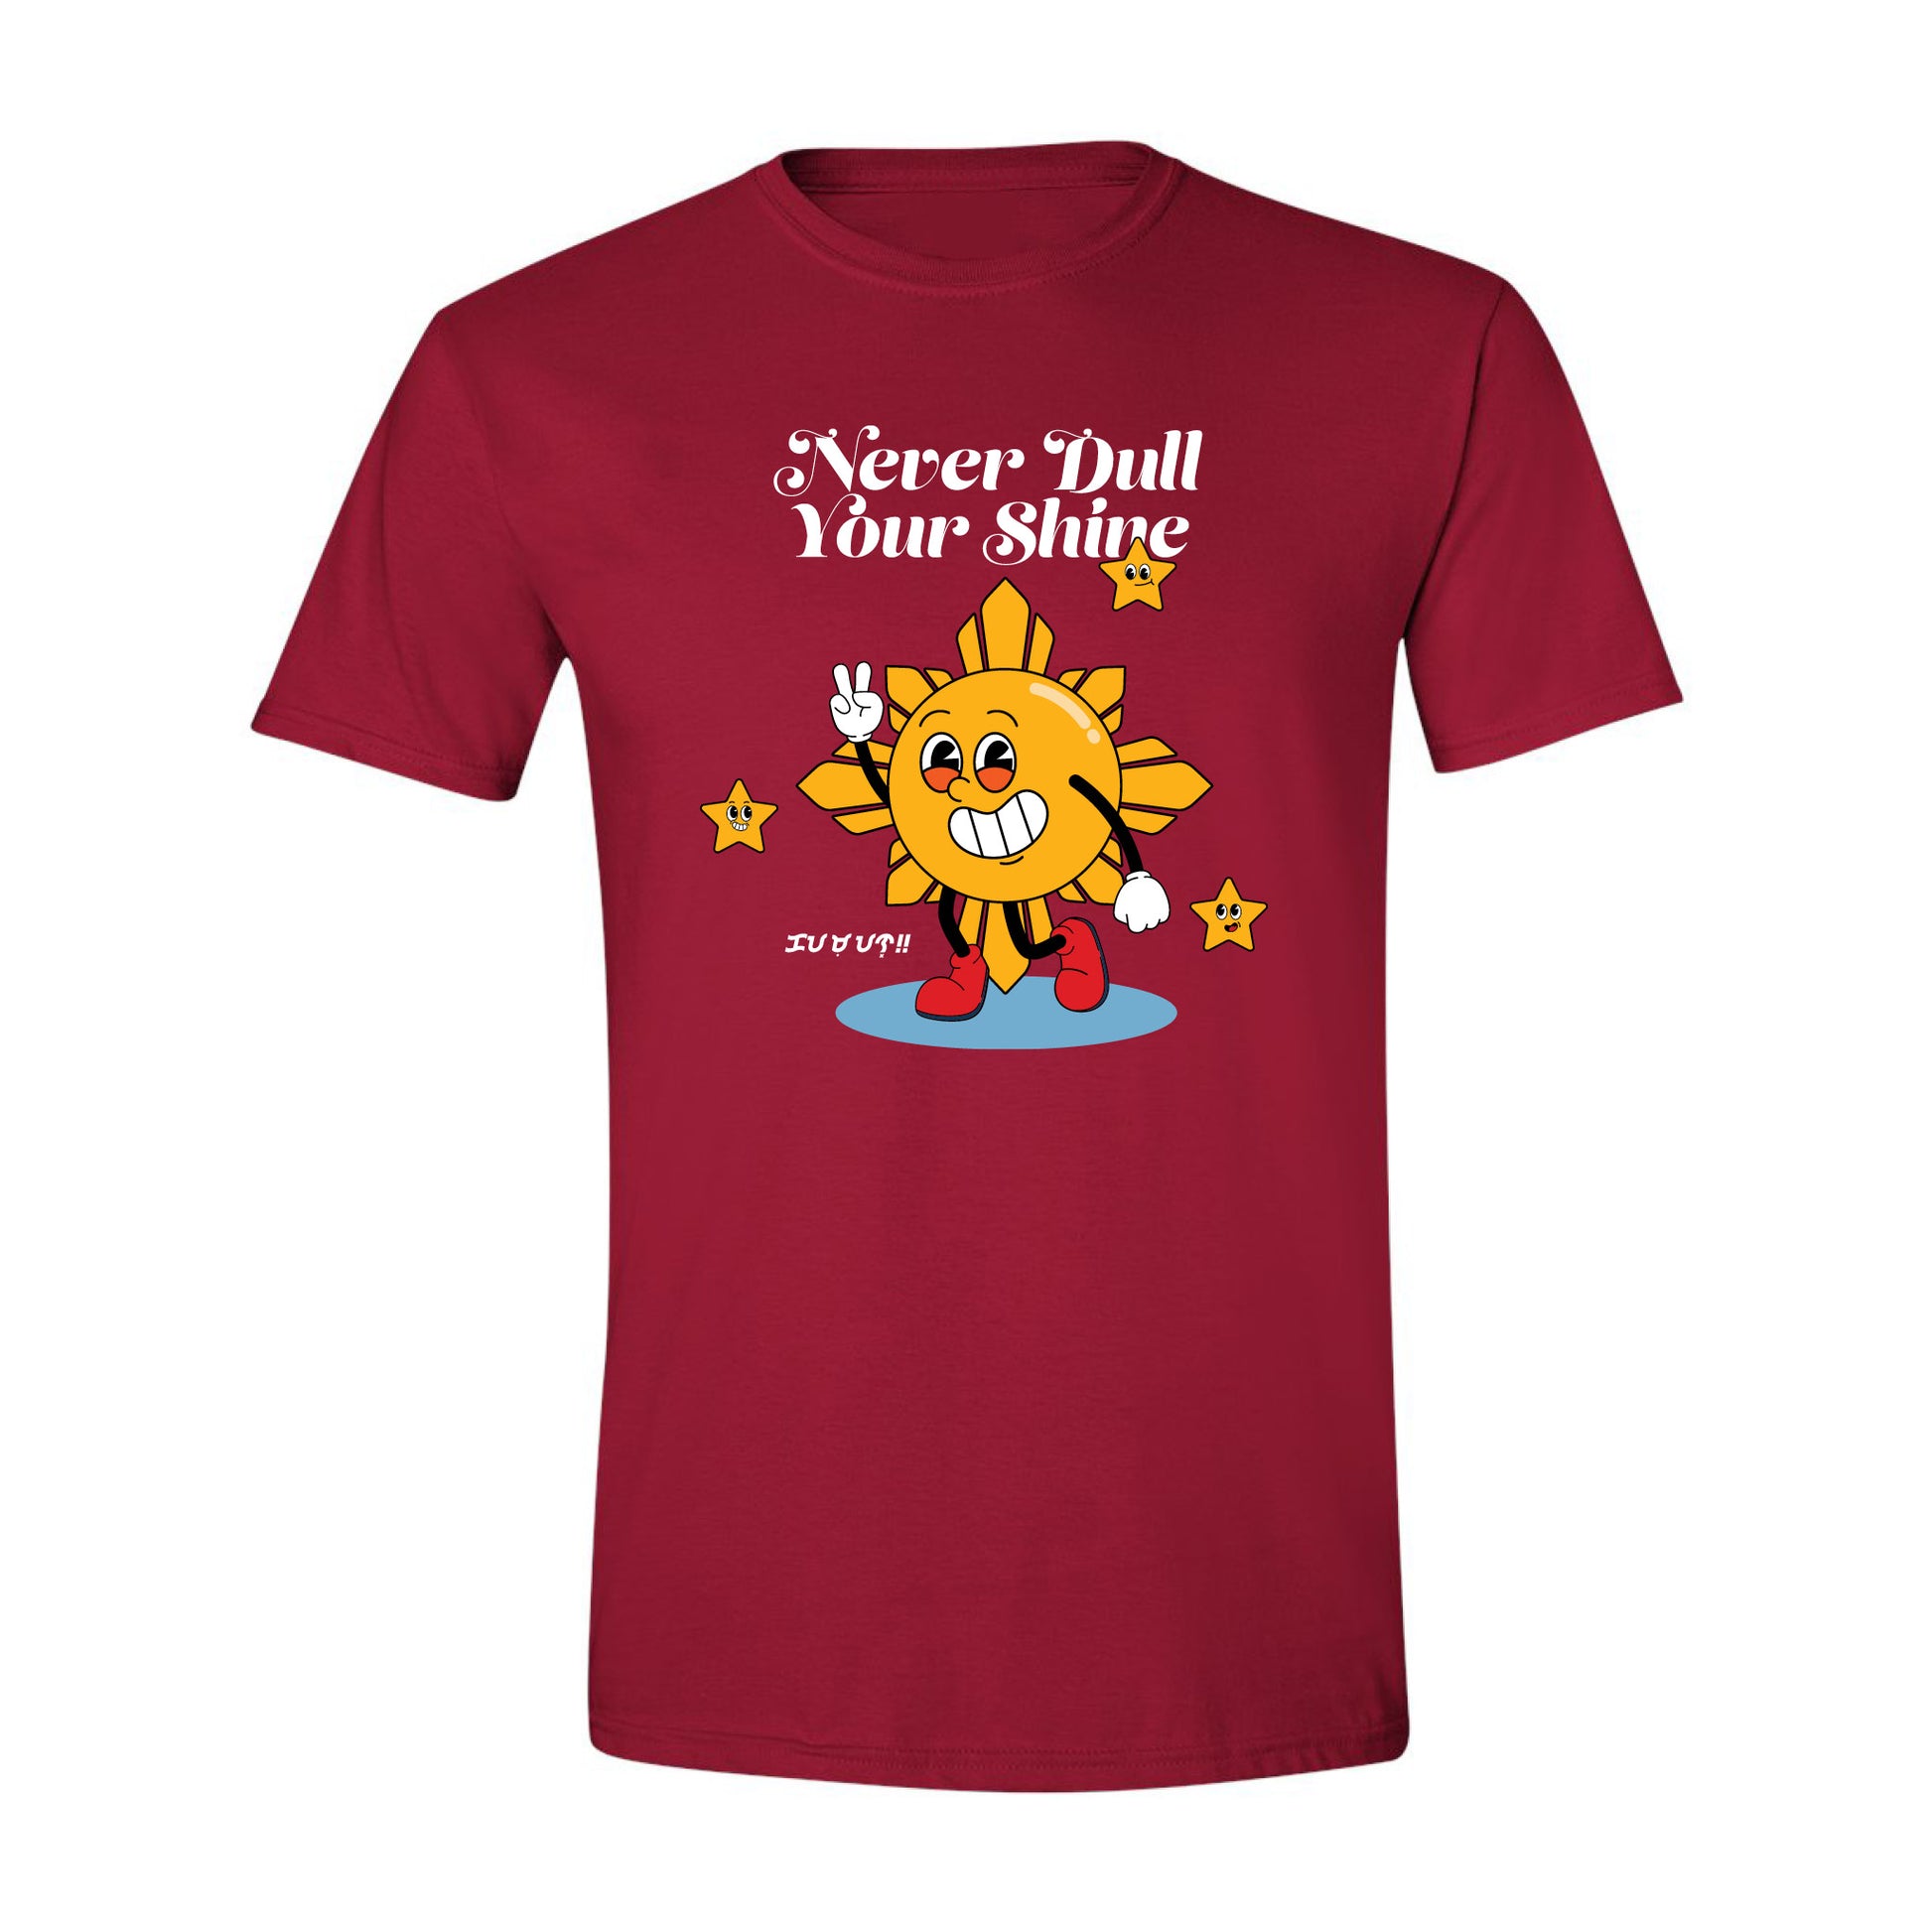 Never Dull Your Shine Tshirt – By and By